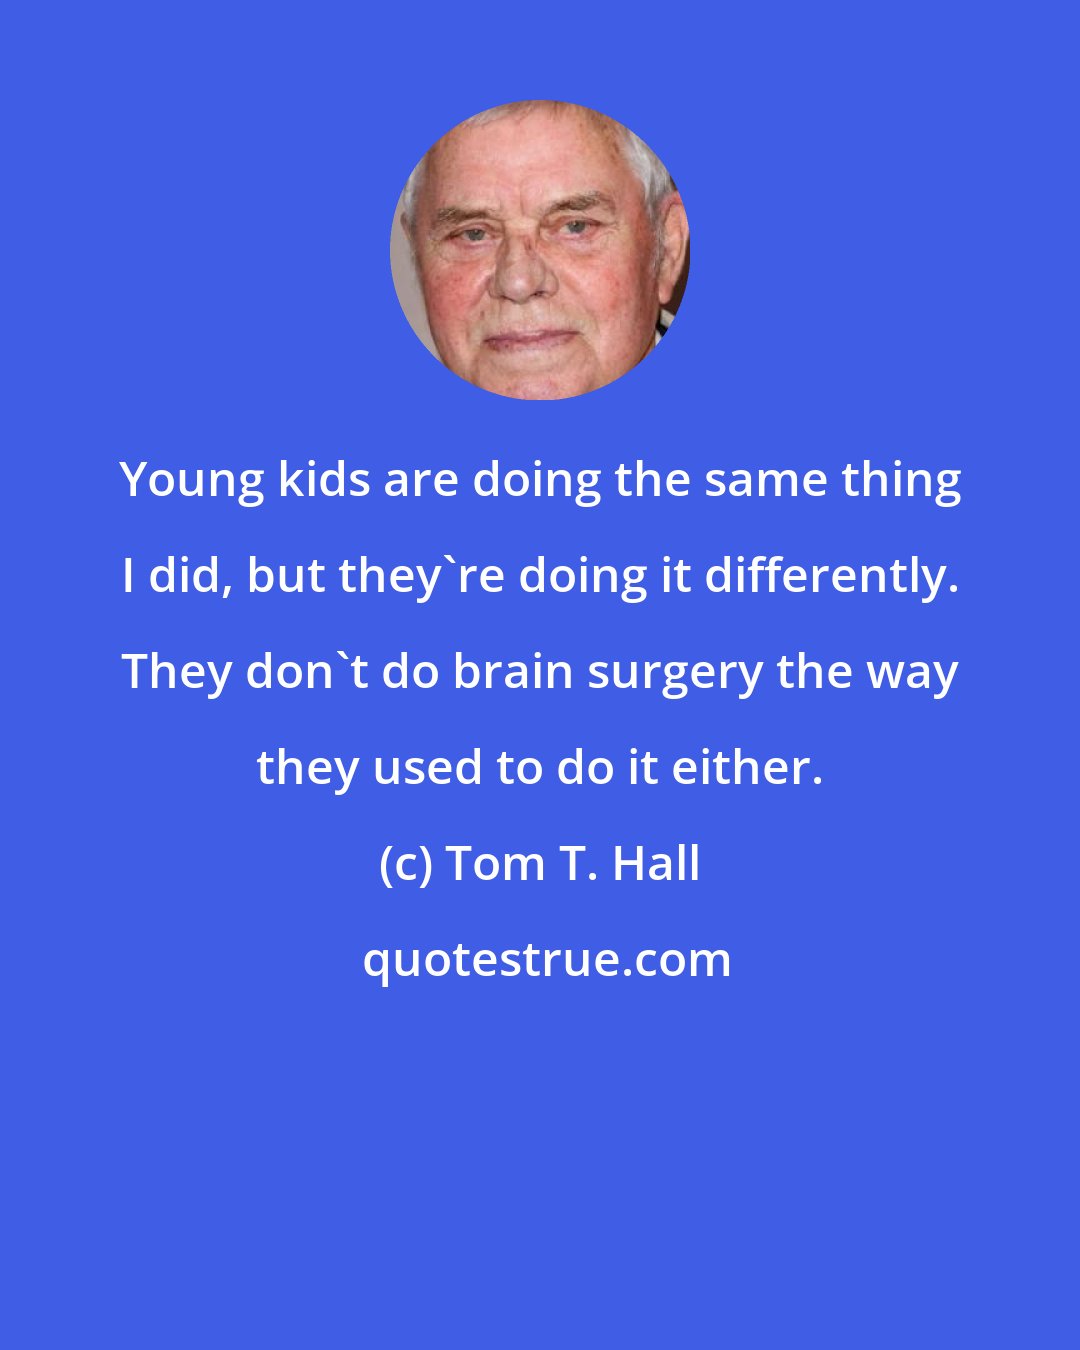 Tom T. Hall: Young kids are doing the same thing I did, but they're doing it differently. They don't do brain surgery the way they used to do it either.